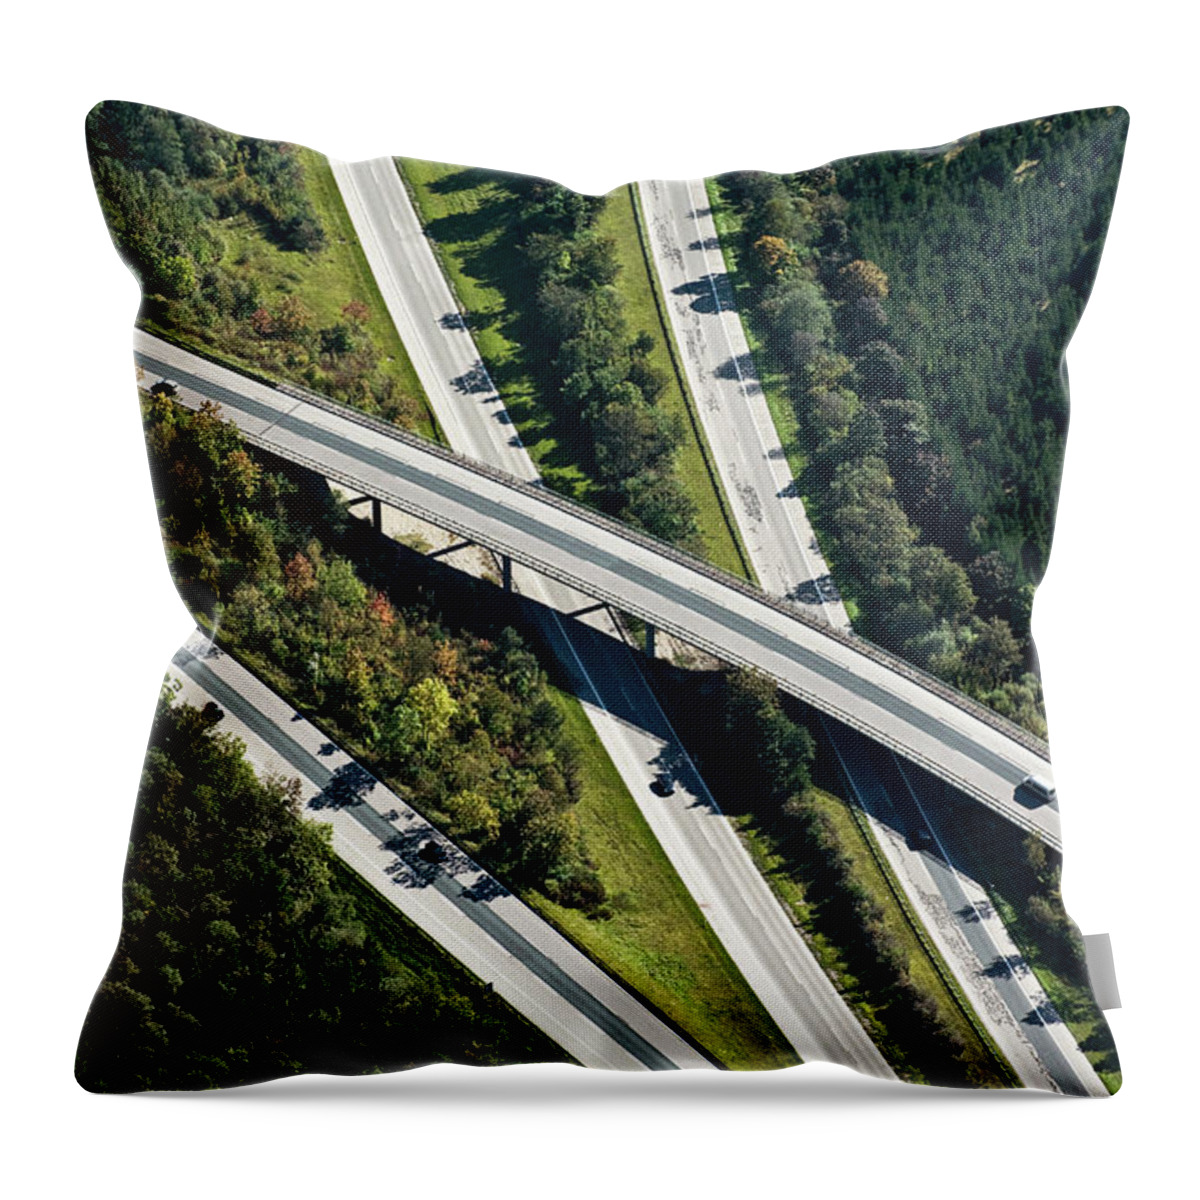 Built Structure Throw Pillow featuring the photograph Highway Bridge by Daniel Reiter